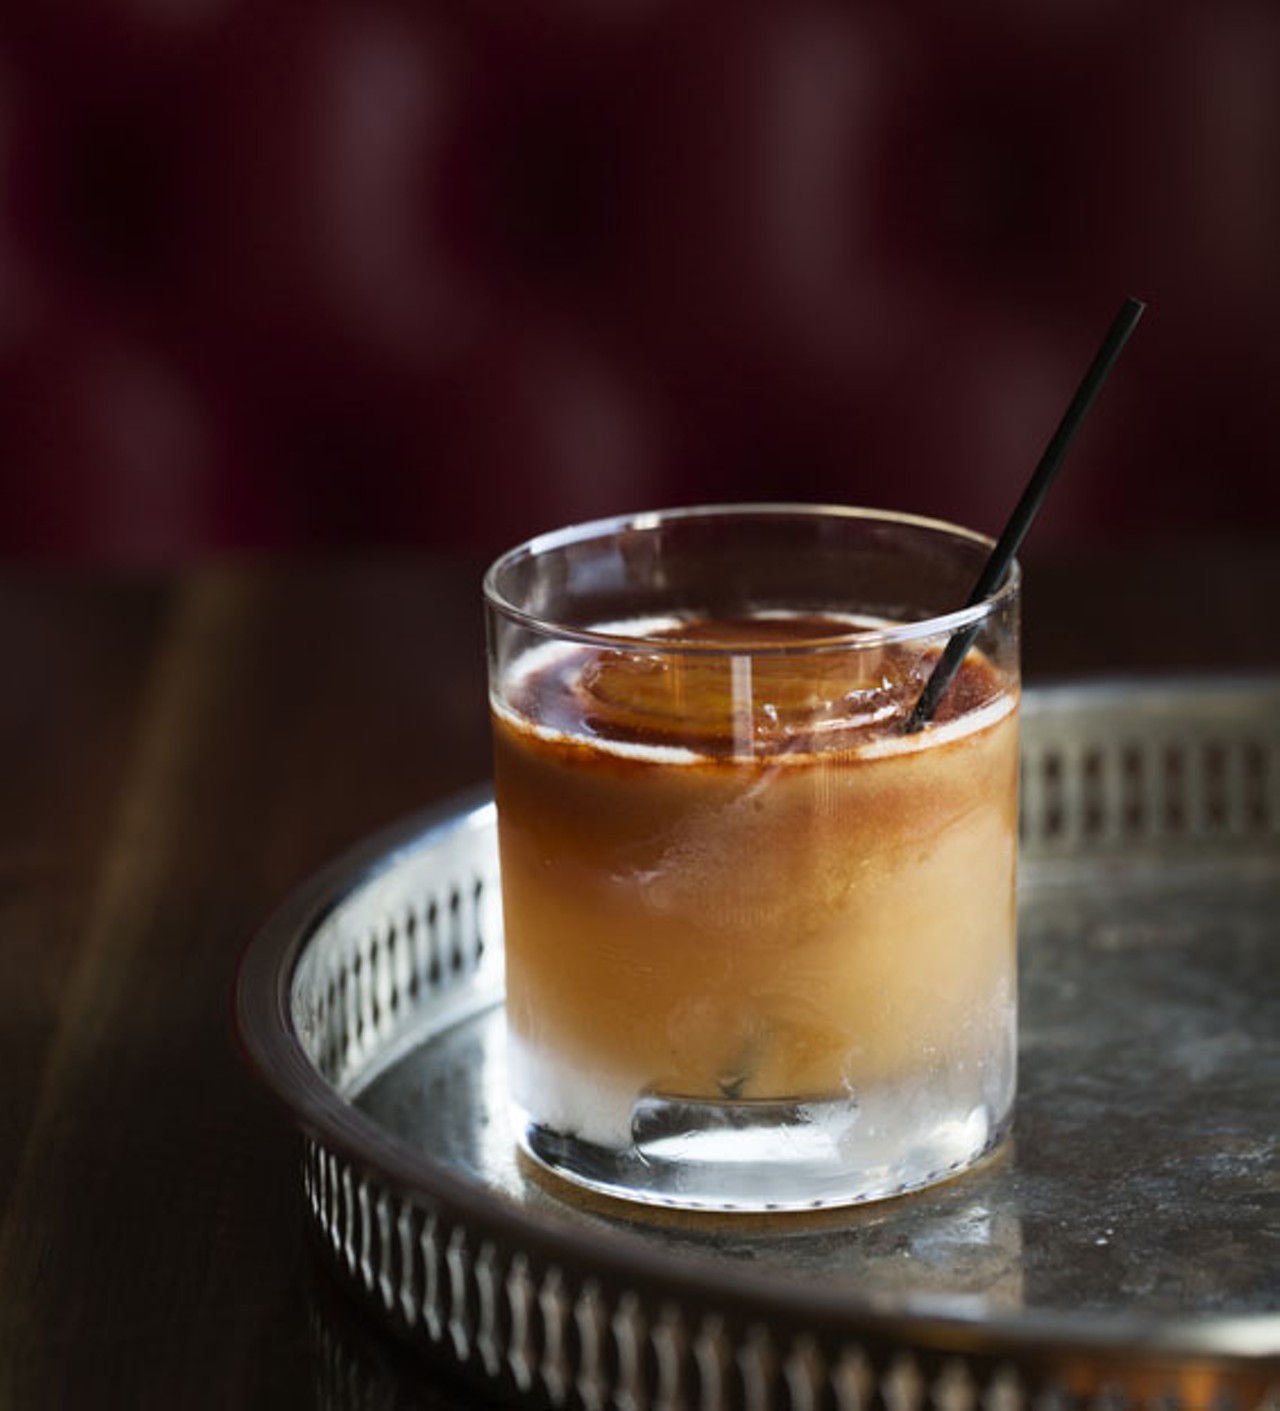 The "Get Behind the Mule," made with El Dorado Dark Rum, L'Orangerie, house ginger cordial and Angostura Bitters.